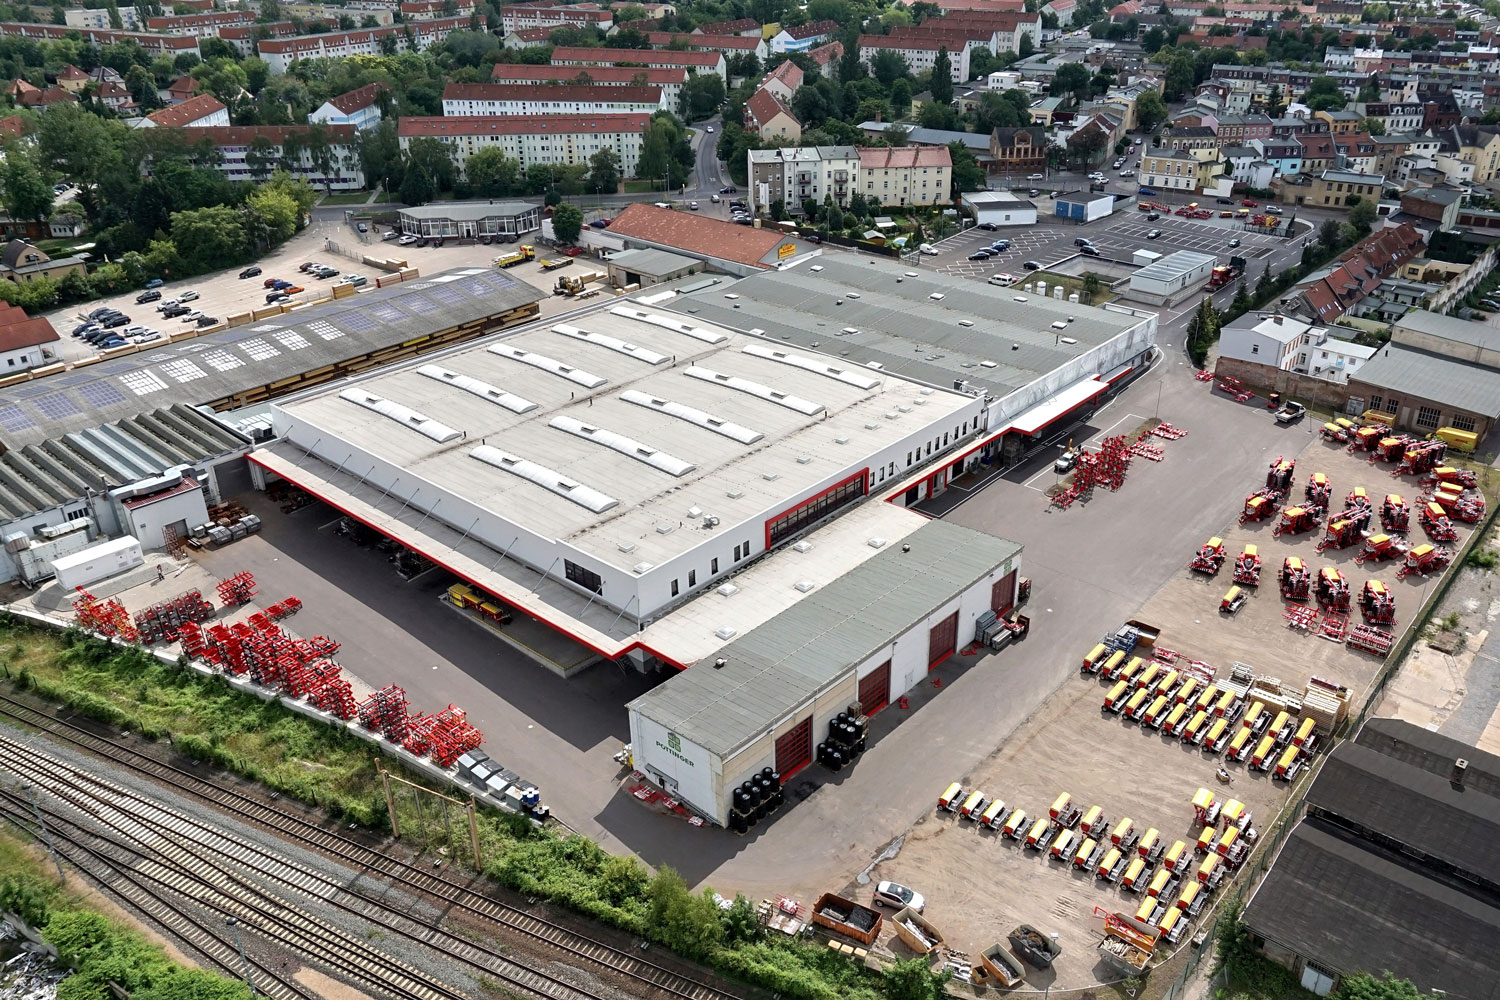 The PÖTTINGER factory in Bernburg has a few expansion stages to catch up.